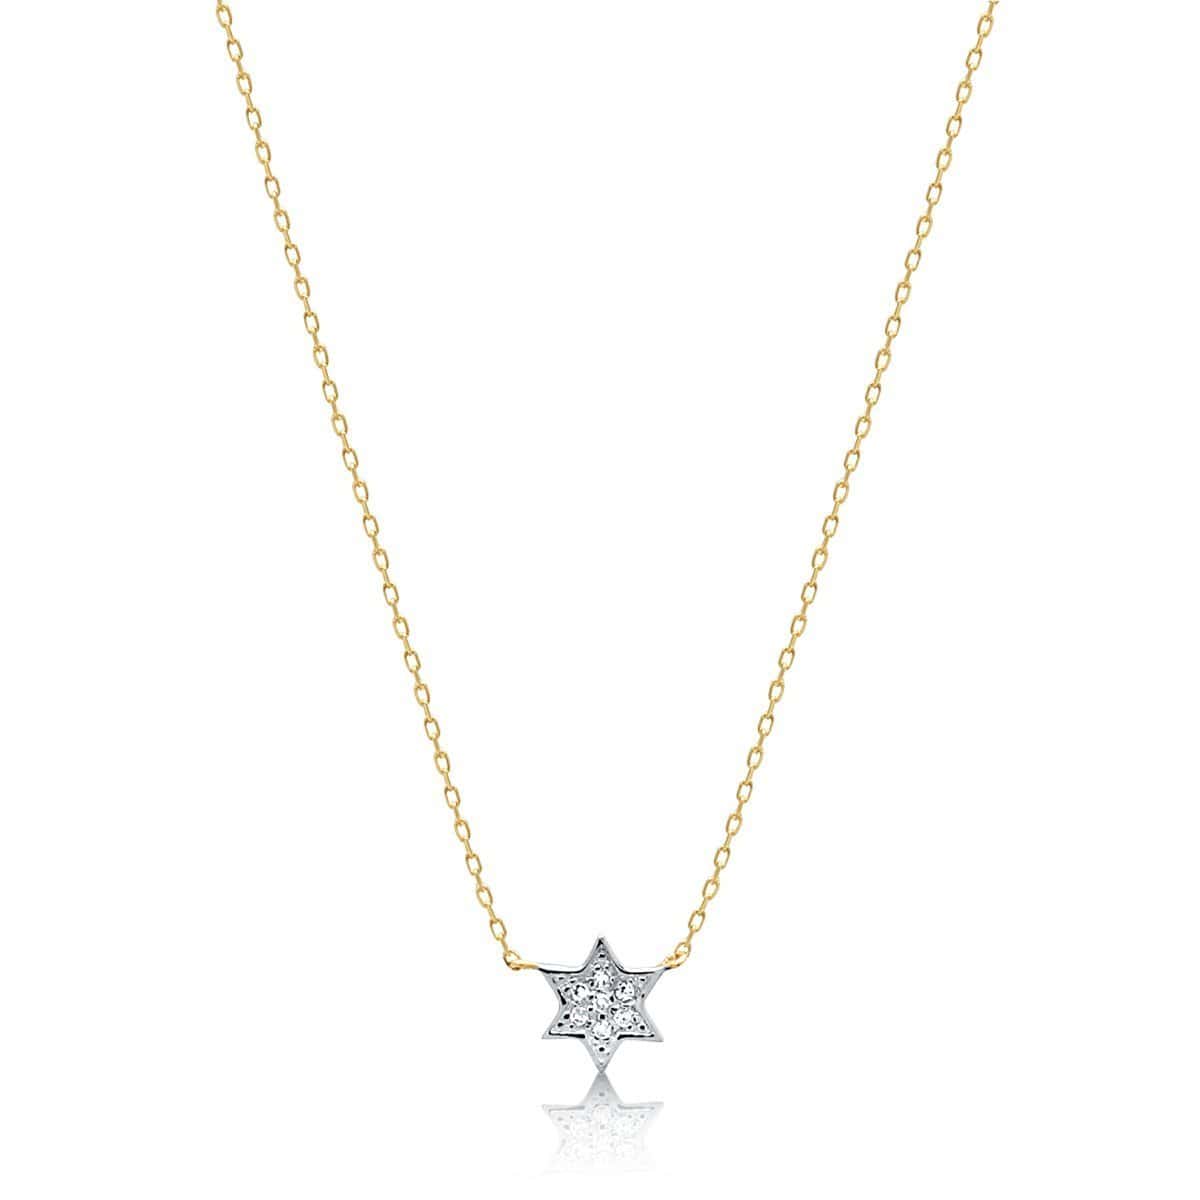 Alef Bet Necklaces Yellow Gold Petite Diamond Jewish Star Necklace in 14k Gold, White Gold or Rose Gold